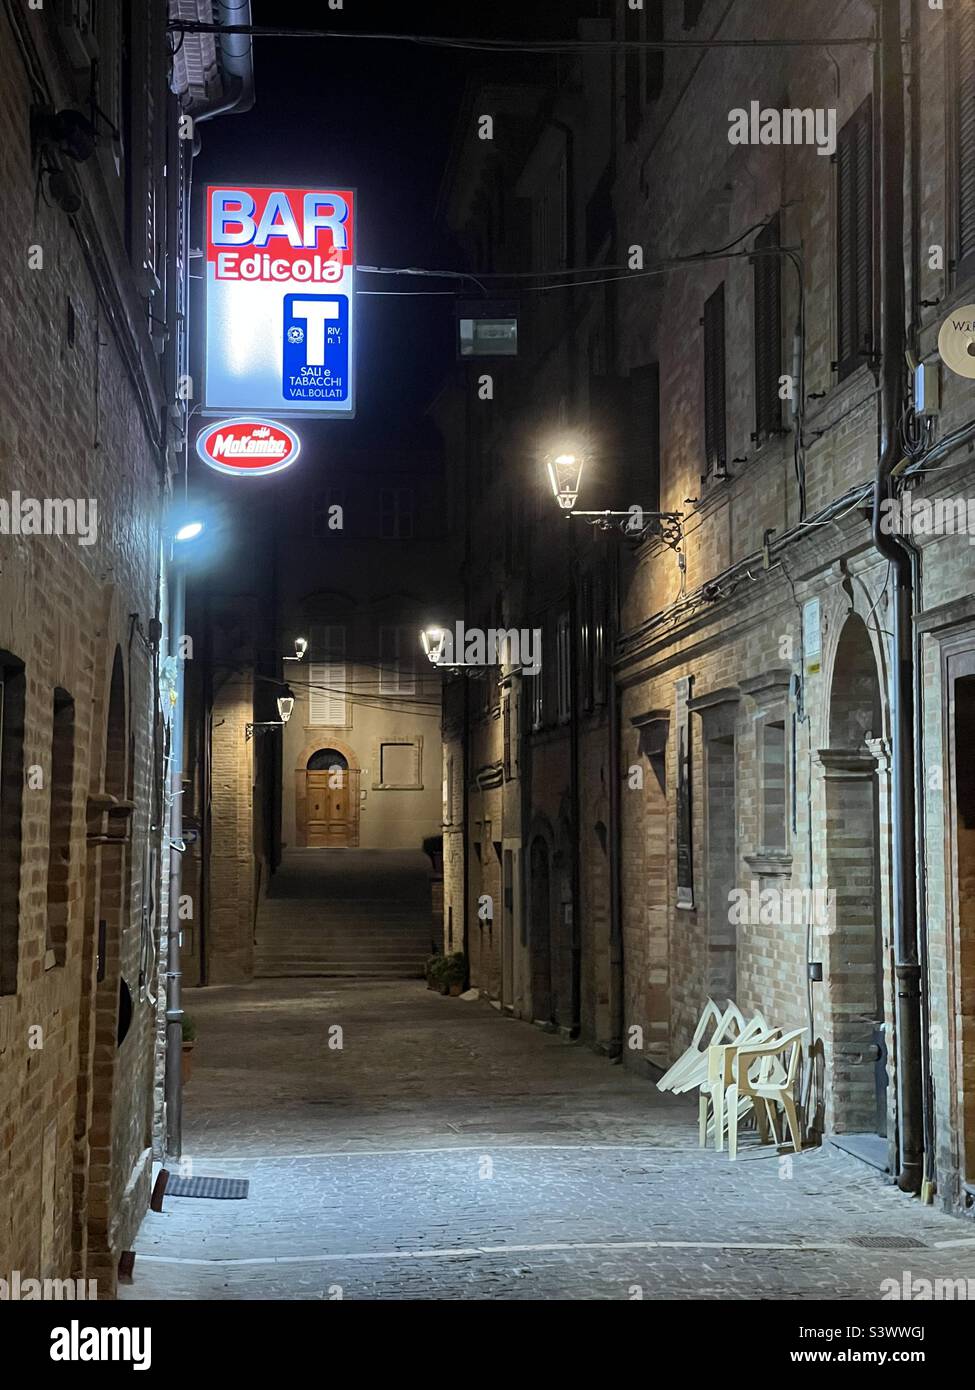 Empty street, night time, of the old medieval village of Montefiore dell’Aso, Marche region, Italy Stock Photo